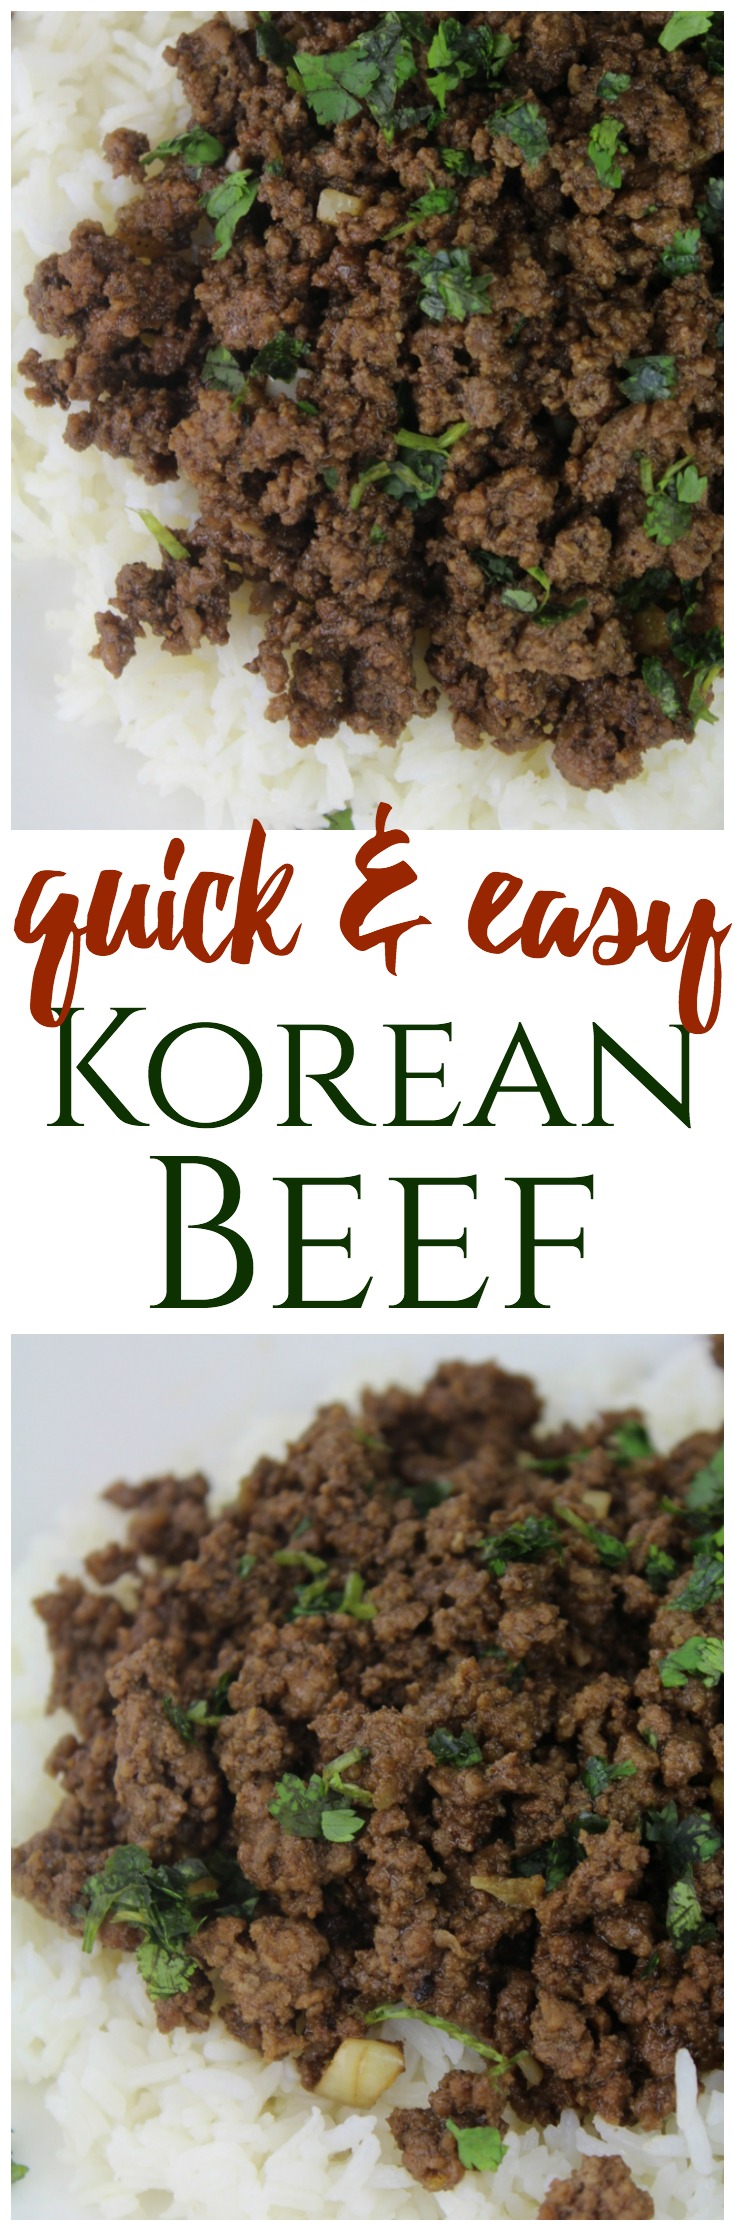 An easy Korean Beef recipe with simple ingredients that can be ready in just minutes - perfect for a busy weeknight and something the family will love!